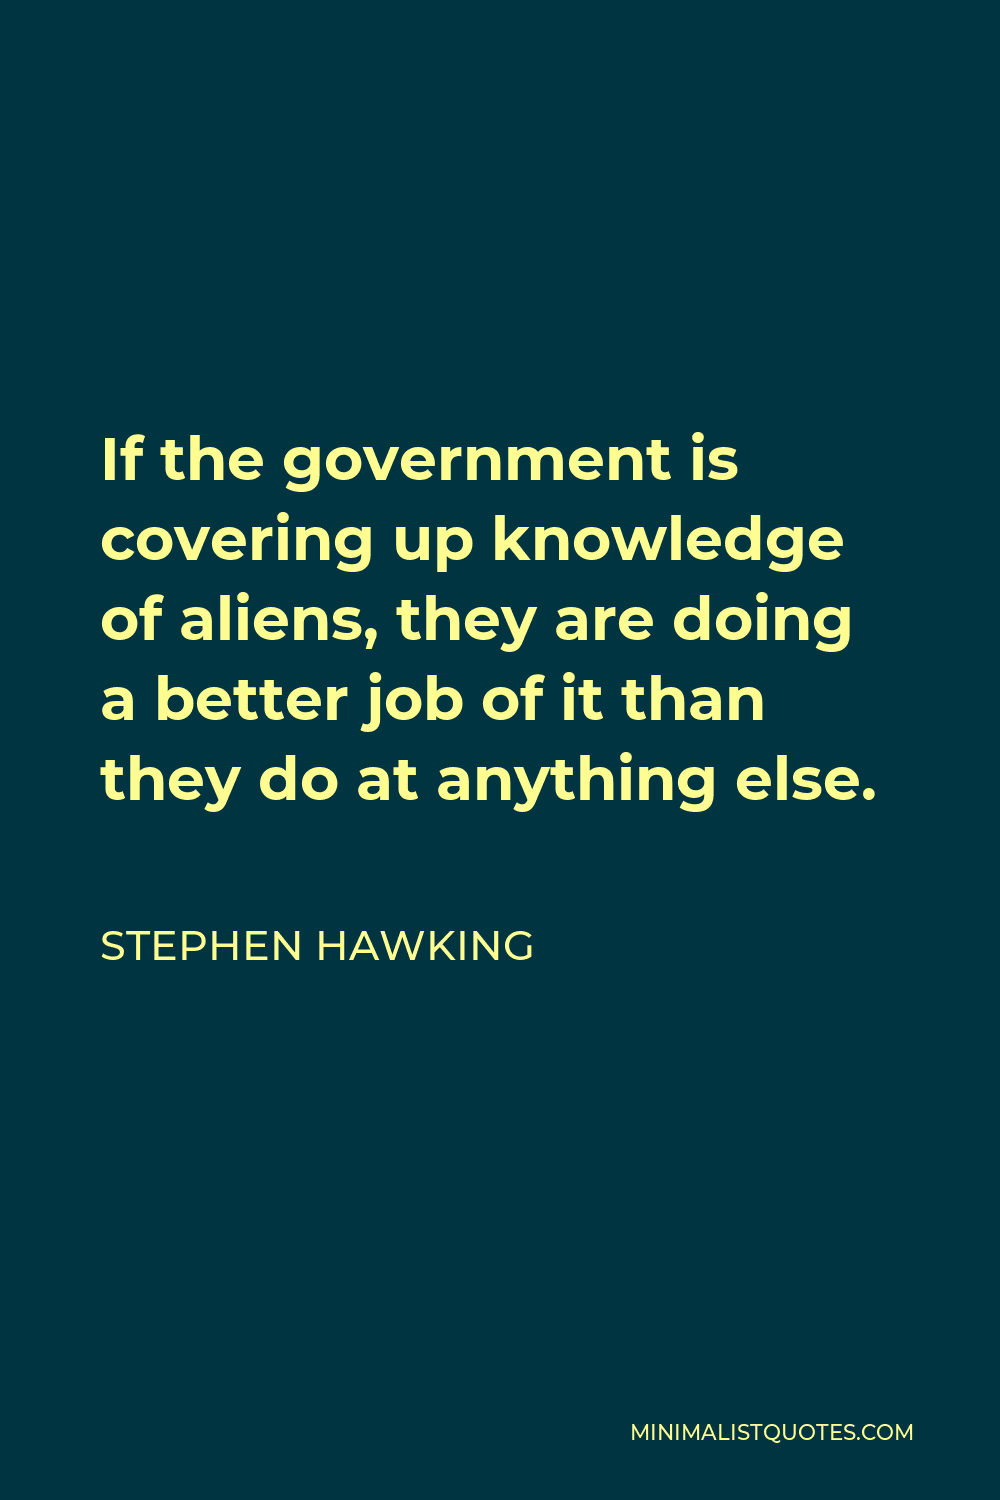 Stephen Hawking Quote - If the government is covering up knowledge of aliens, they are doing a better job of it than they do at anything else.